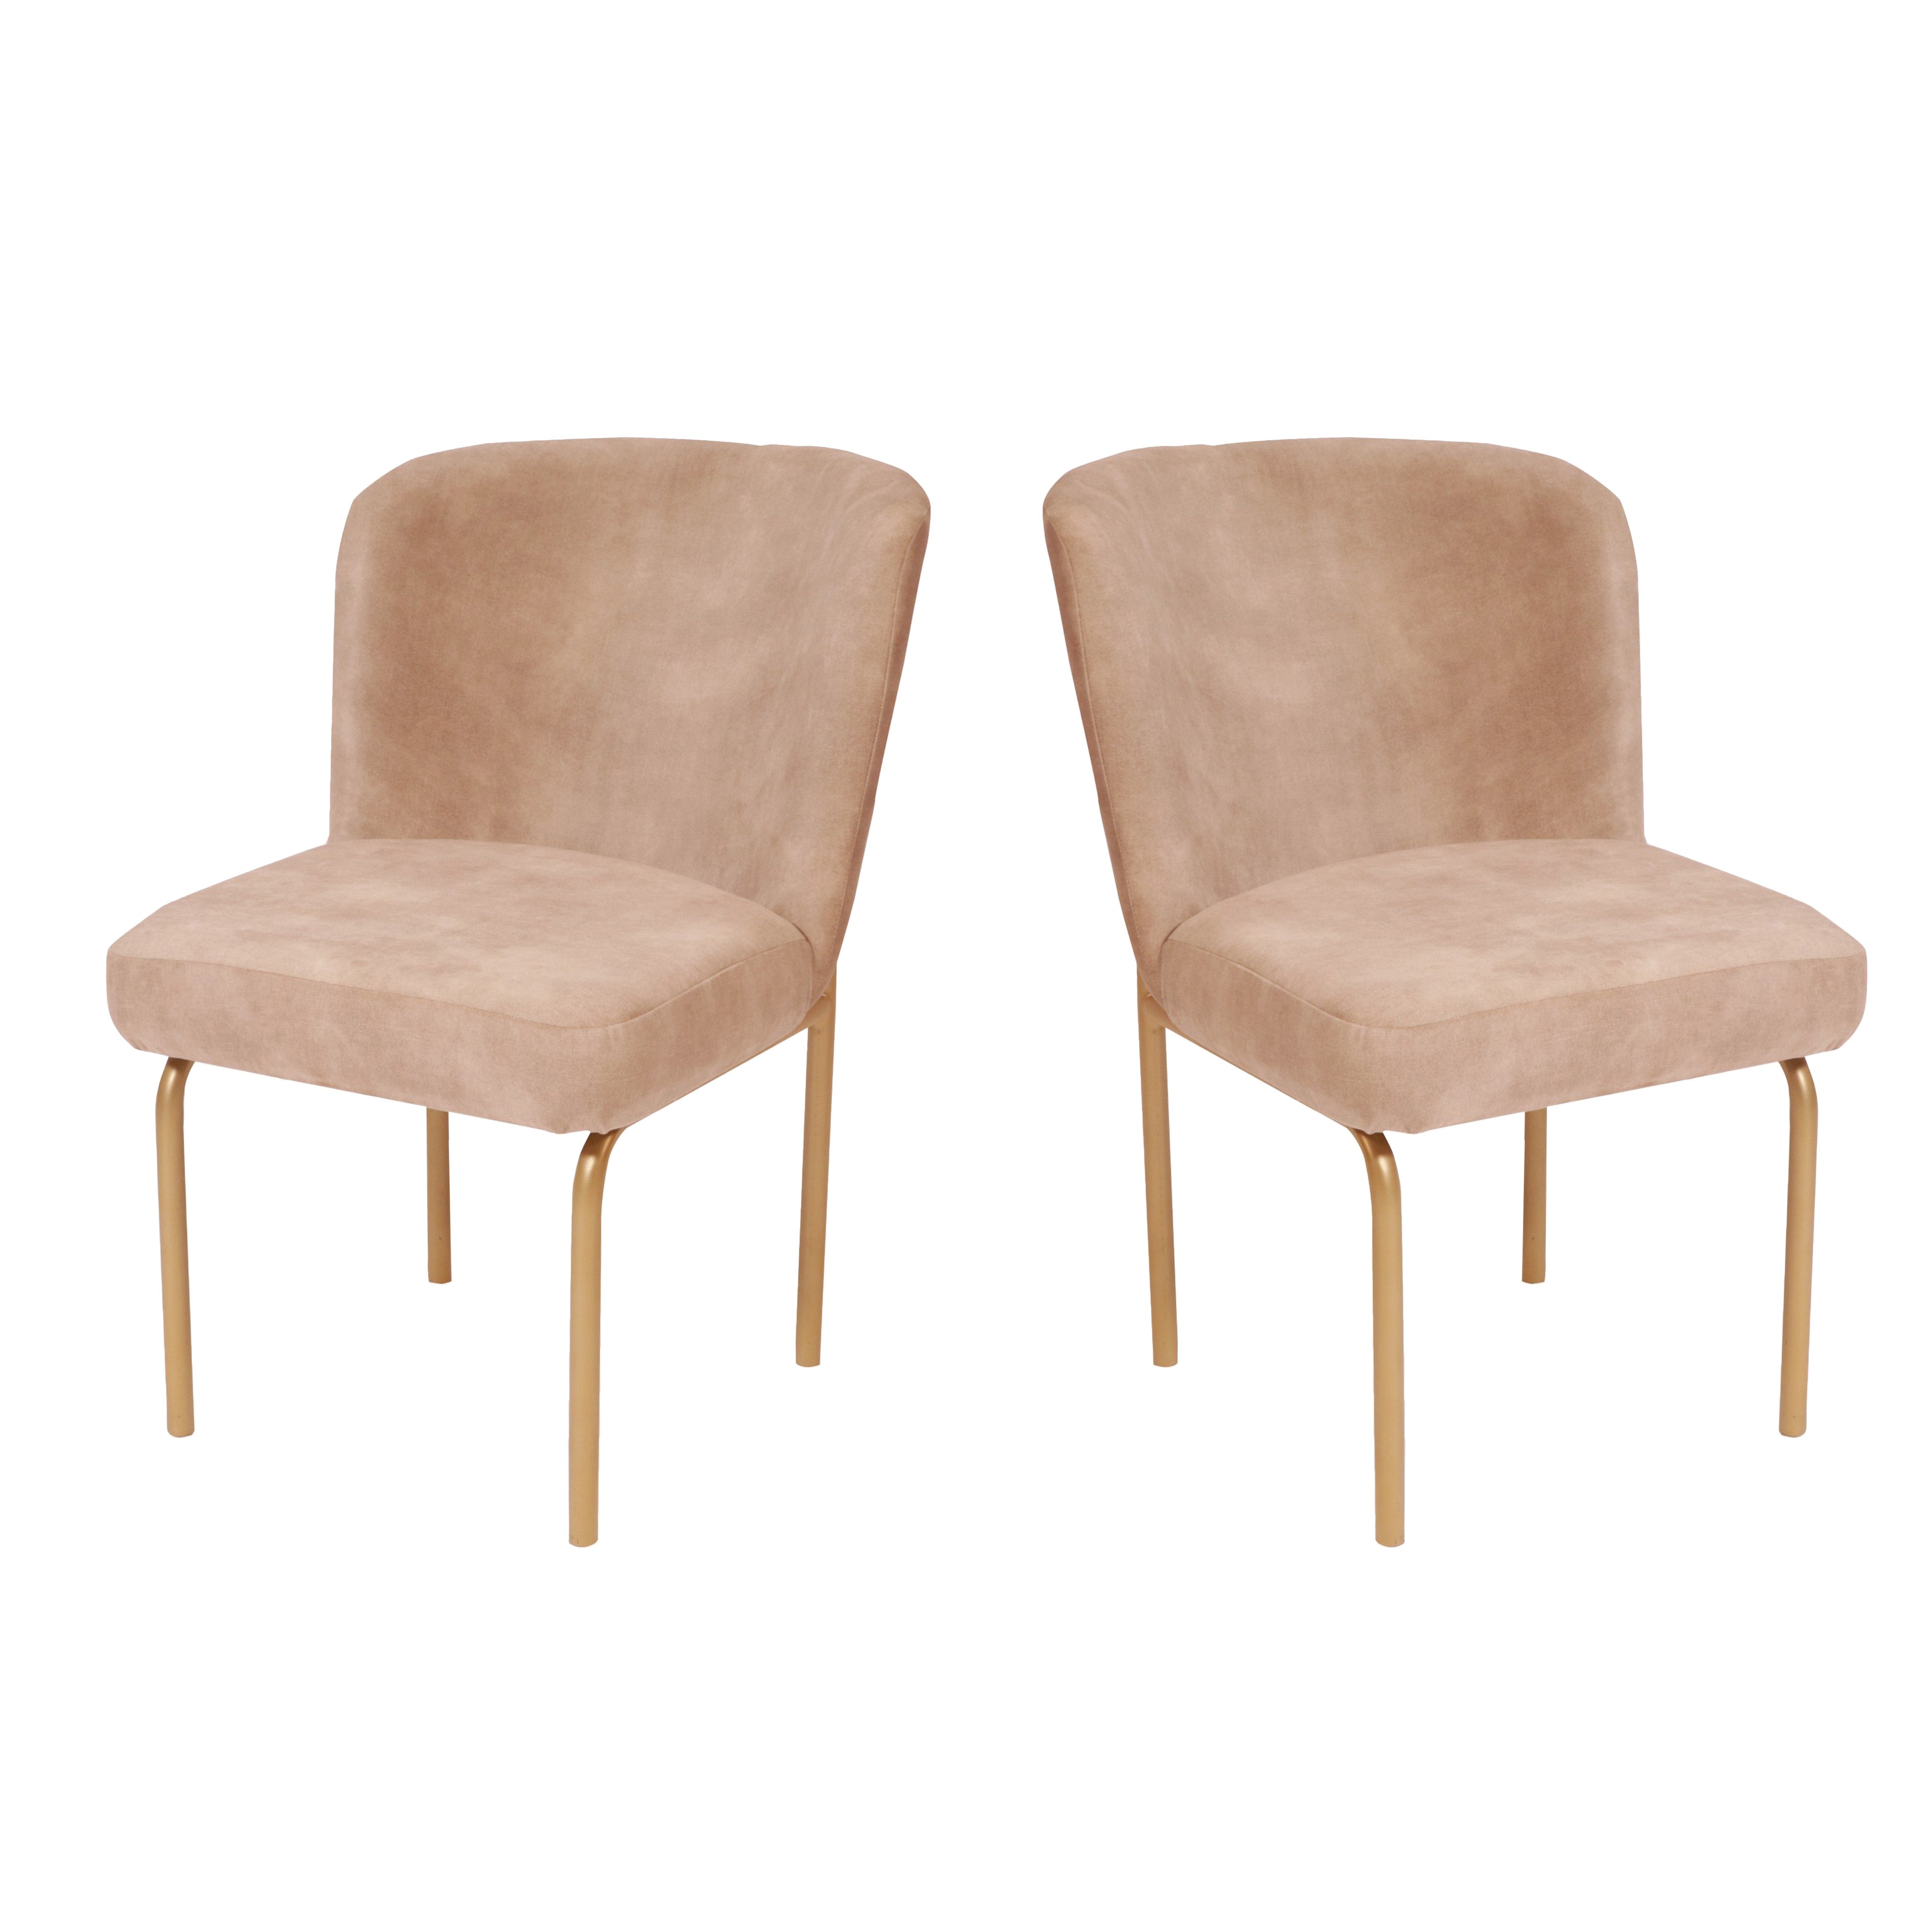 (Set of 2) Upholstered Golden Chair Dining Chair